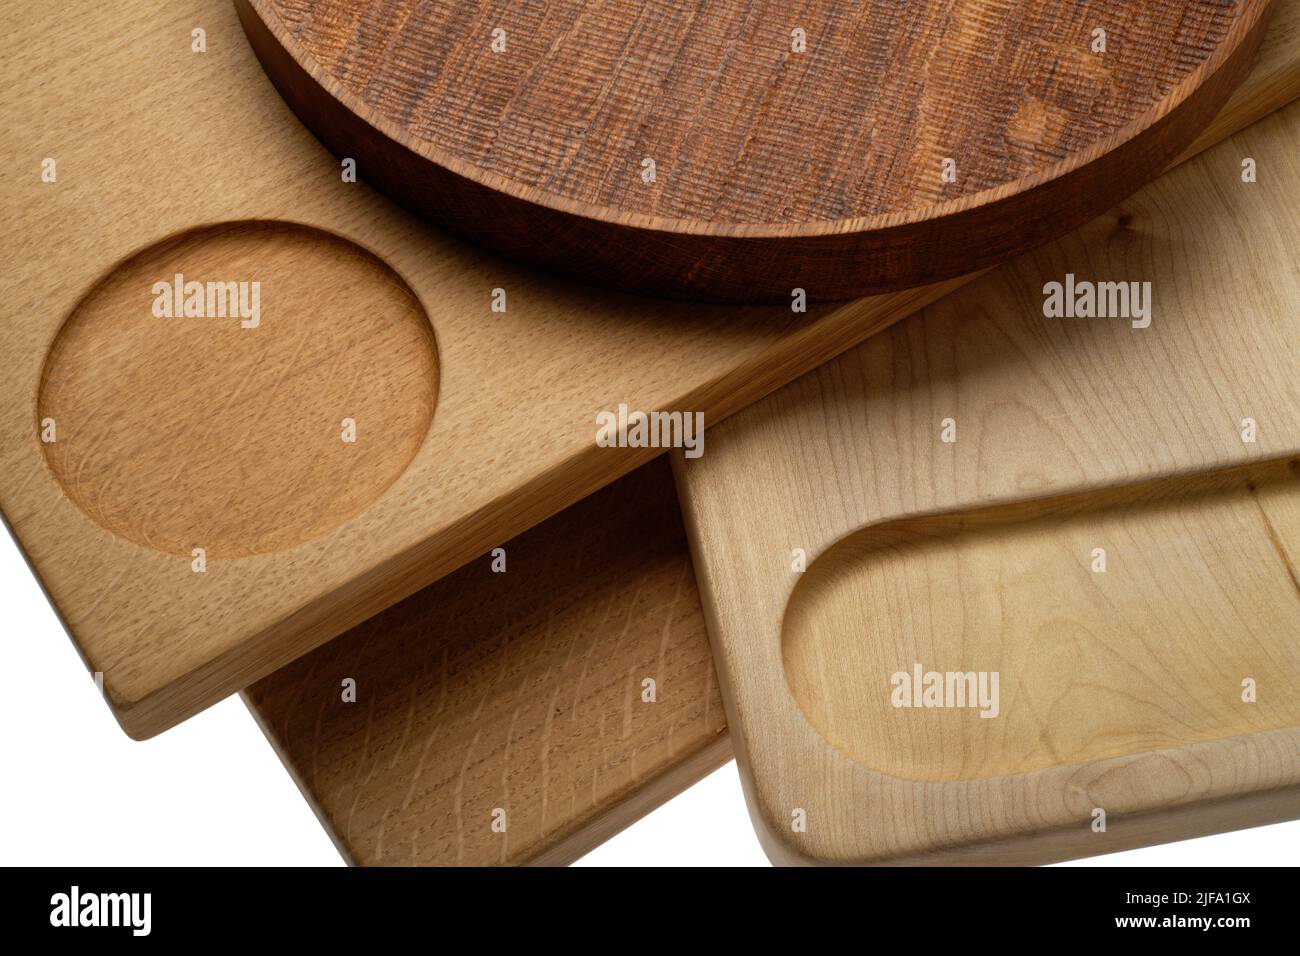 A group of wooden chopping boards and a round tray found in the modern kitchen. Food prep boards. Stock Photo